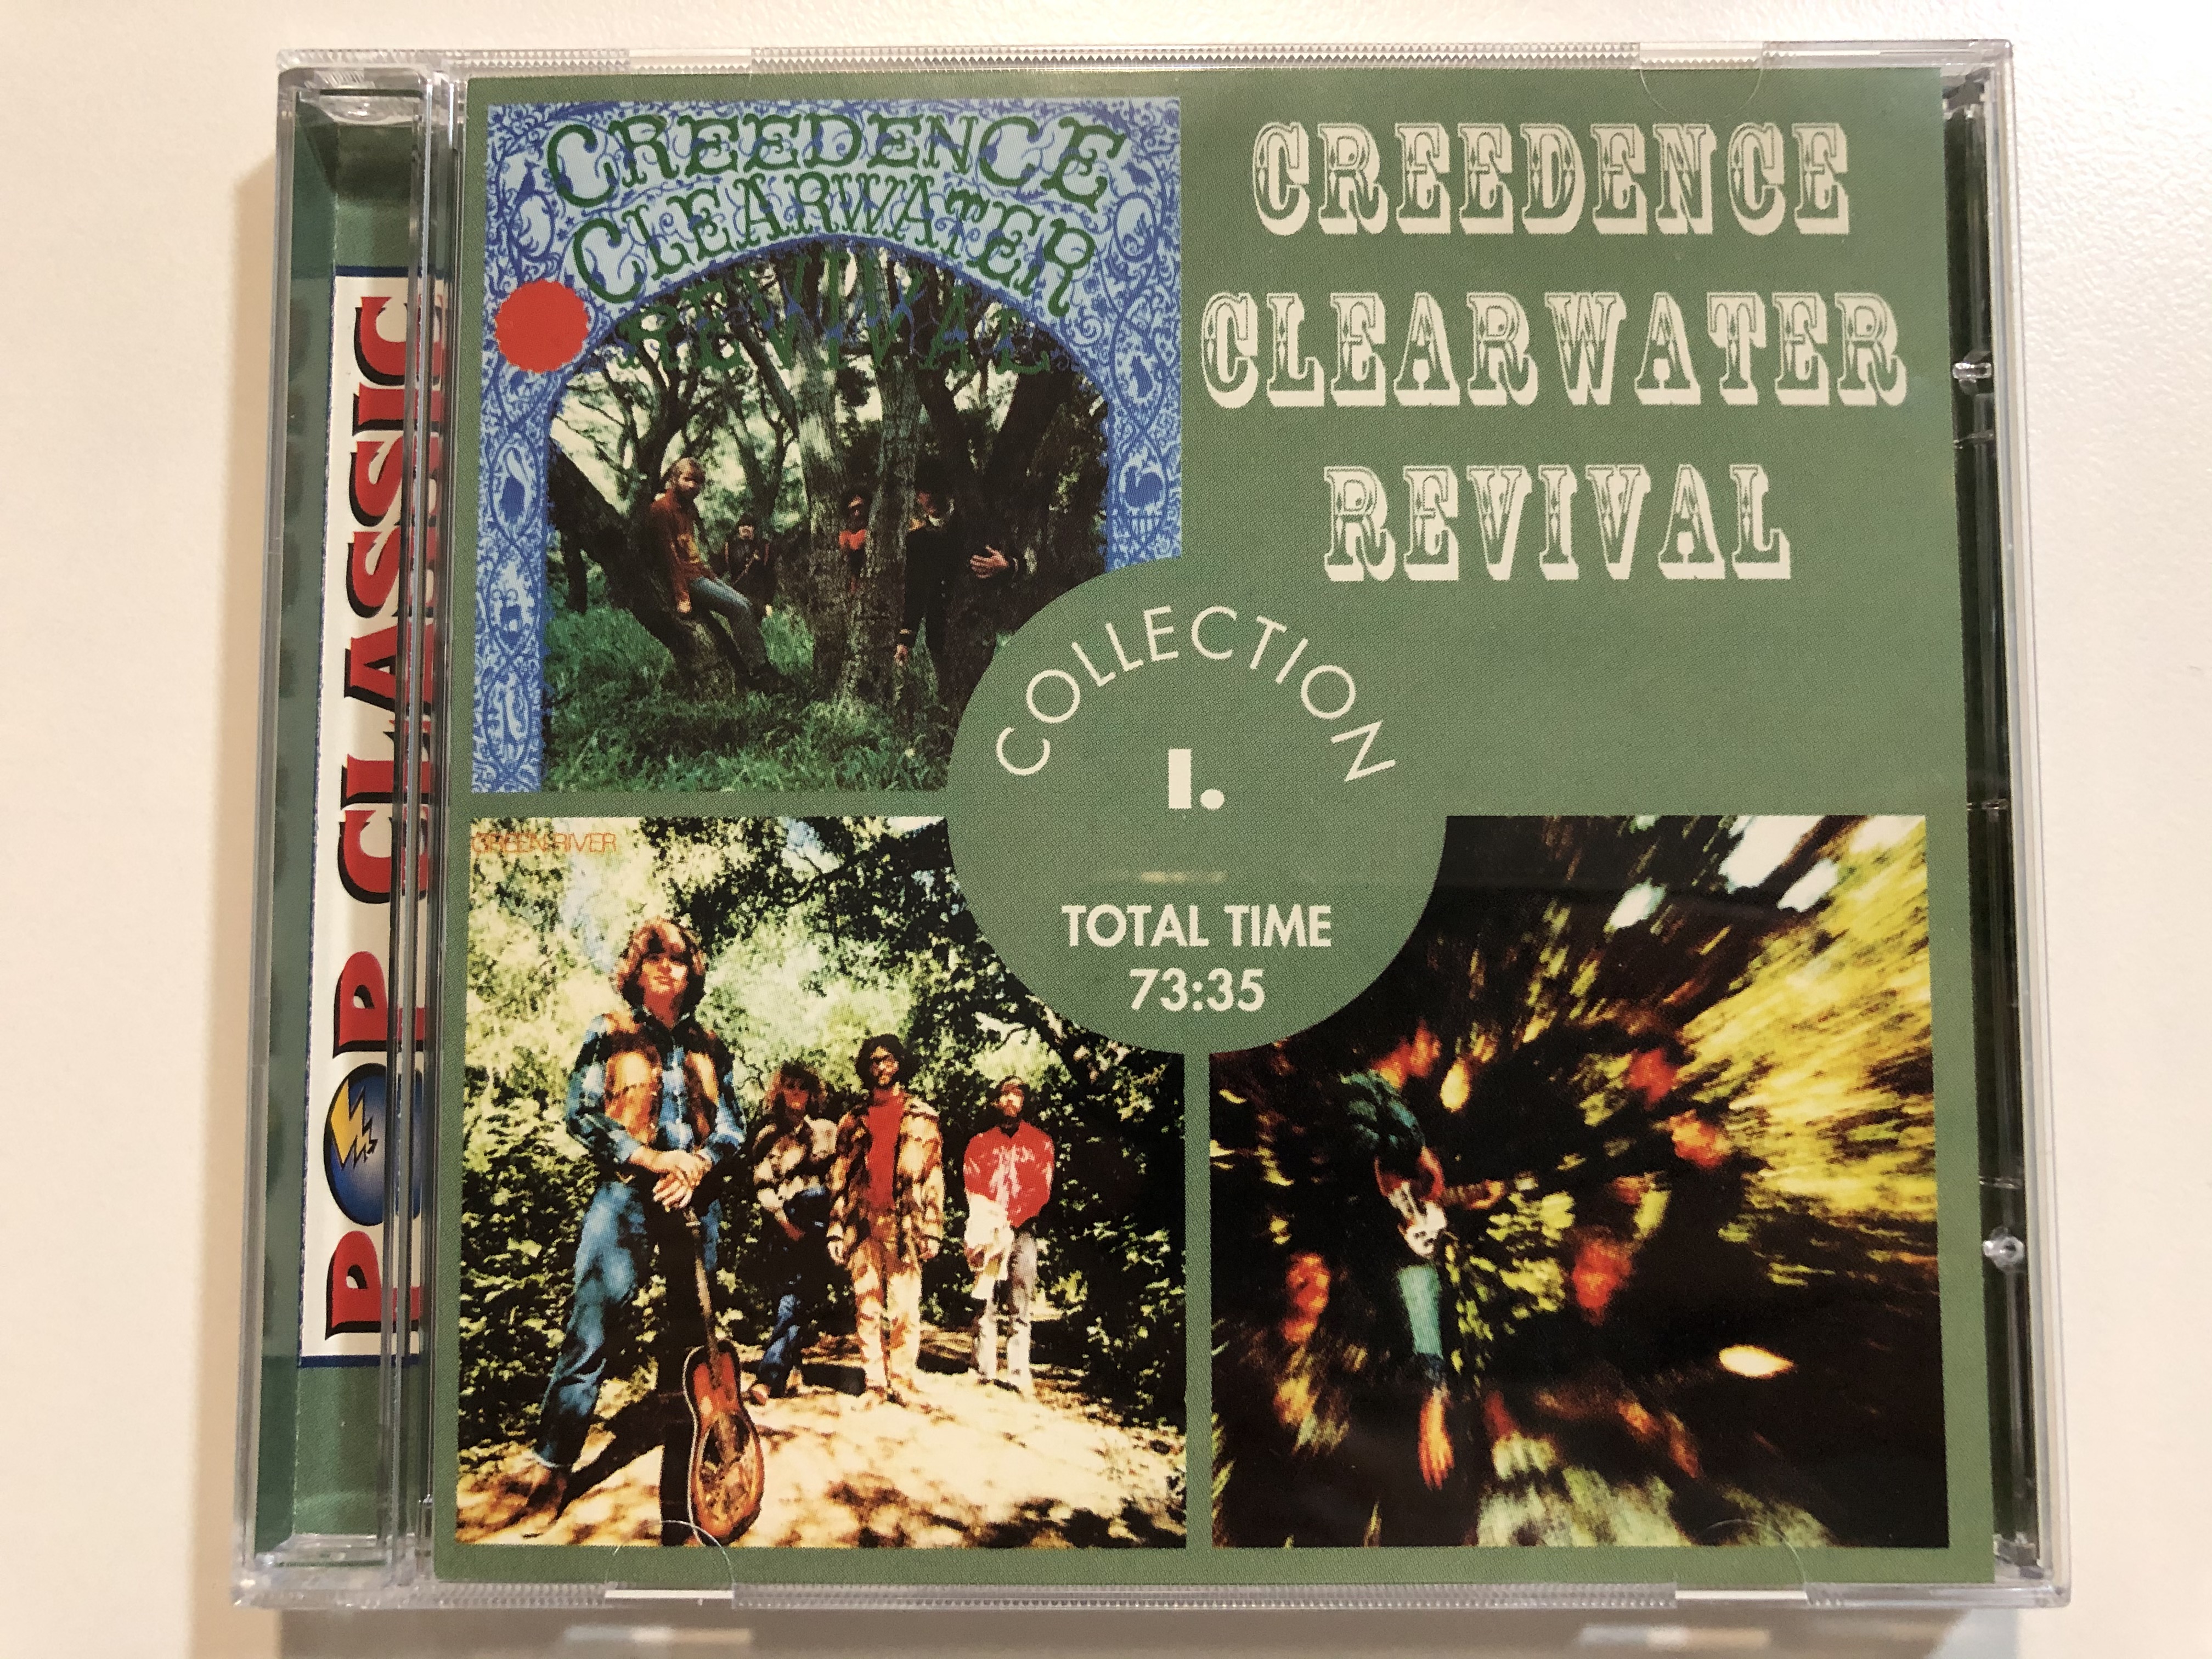 creedence-clearwater-revival-collection-i.-total-time-7335-euroton-audio-cd-eucd-0115-1-.jpg